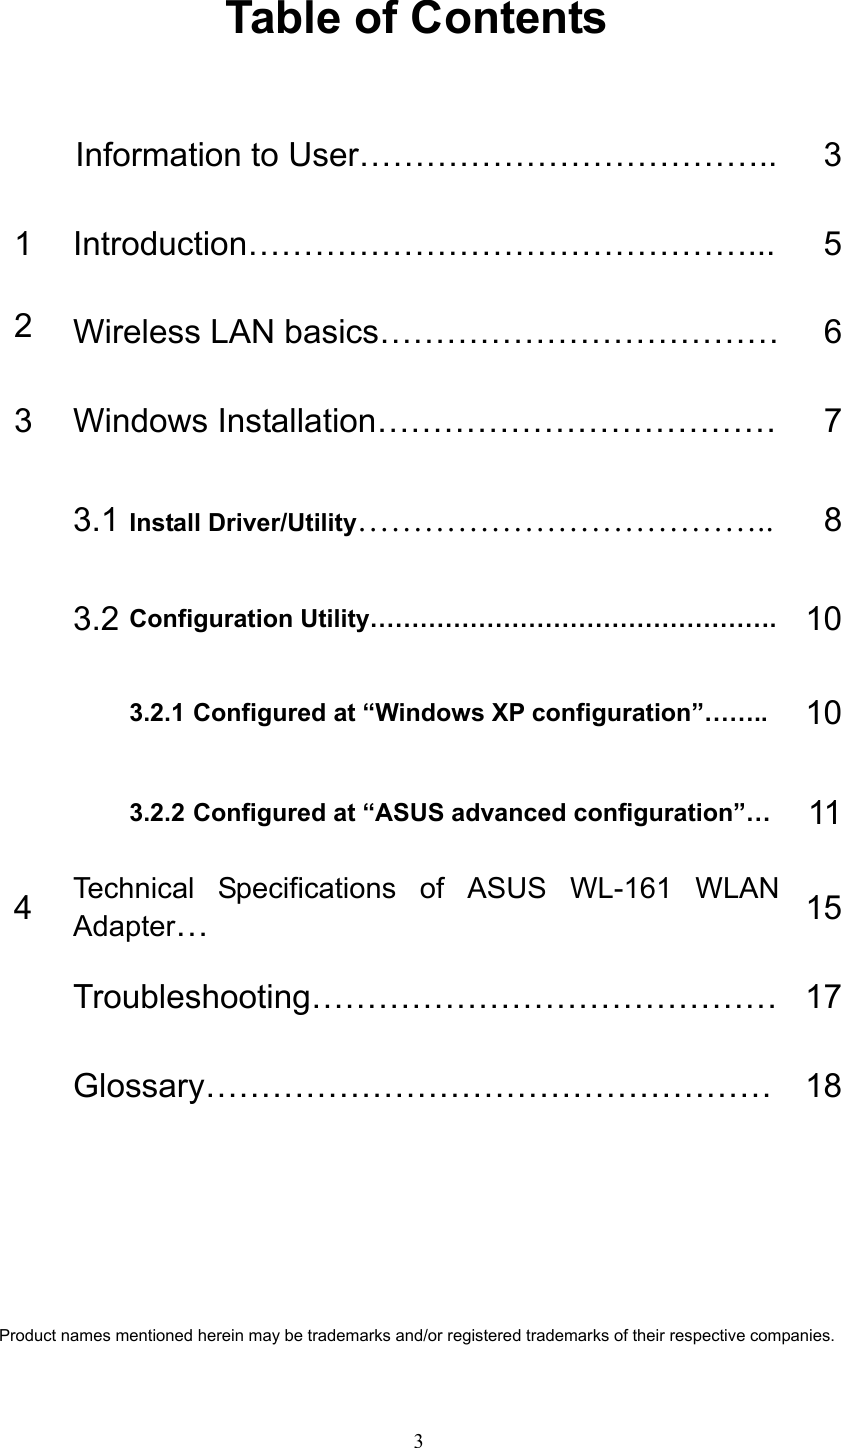   3 Table of Contents  Information to User………………………………..  31 Introduction………………………………………...  52  Wireless LAN basics………………………………    63  Windows Installation………………………………  7 3.1 Install Driver/Utility……………………………….. 8 3.2 Configuration Utility………………………………………….  103.2.1 Configured at “Windows XP configuration”……..  10  3.2.2 Configured at “ASUS advanced configuration”…  114  Technical Specifications of ASUS WL-161 WLAN Adapter…  15 Troubleshooting…………………………………… 17 Glossary…………………………………………… 18     Product names mentioned herein may be trademarks and/or registered trademarks of their respective companies. 